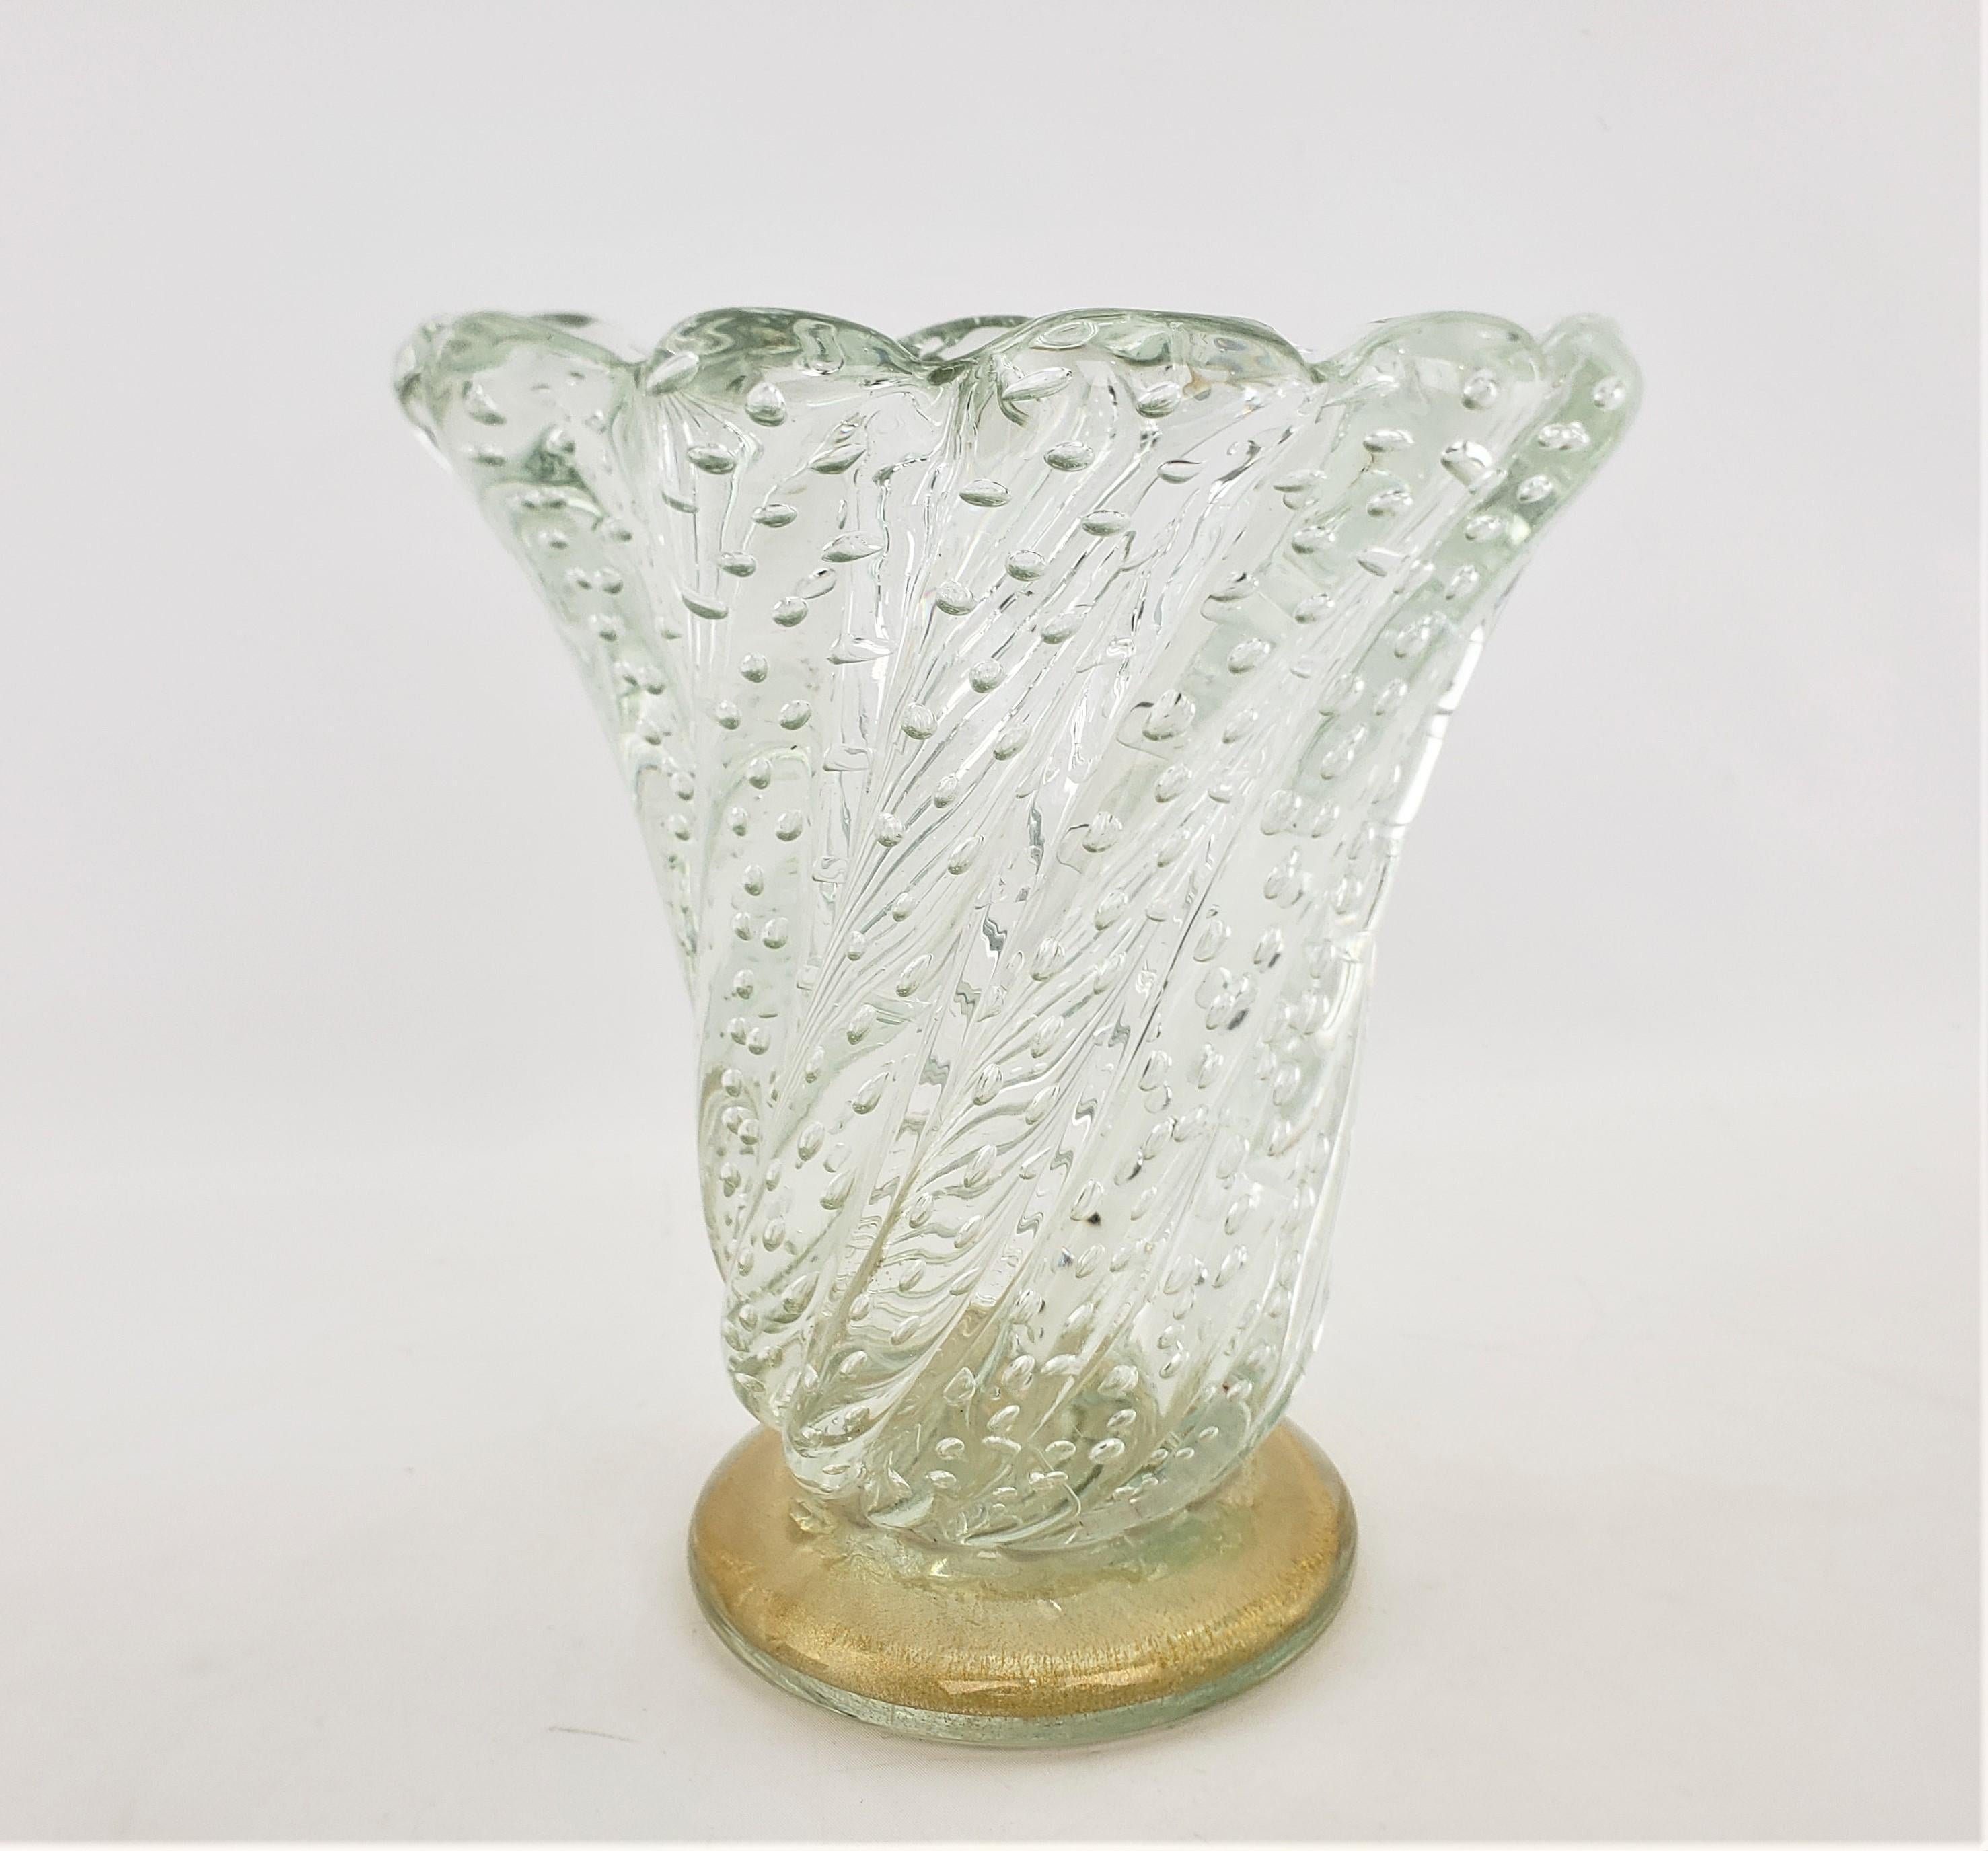 This large and substantial art glass vase is unsigned, but presumed to have been done in Murano Italy in approximately 1965 in a Barovier Mid-Century Modern style. The vase is done with a very thick clear glass that has a ribbed swirl from the base